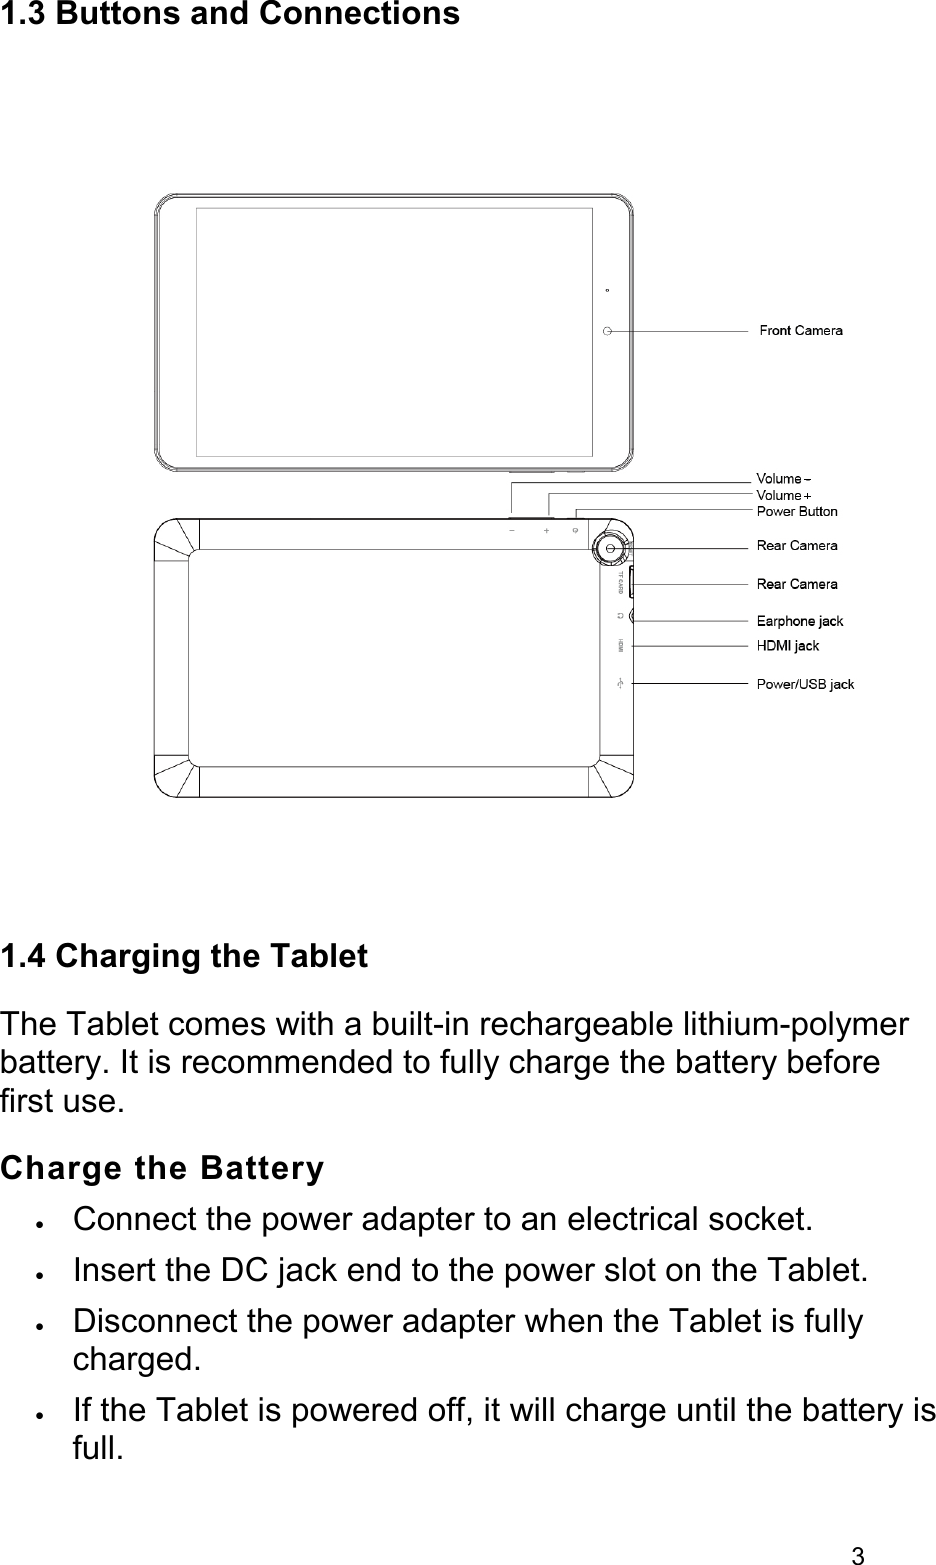 31.3 Buttons and Connections1.4 Charging the TabletThe Tablet comes with a built-in rechargeable lithium-polymer battery. It is recommended to fully charge the battery before first use.Charge the Battery•Connect the power adapter to an electrical socket.•Insert the DC jack end to the power slot on the Tablet.•Disconnect the power adapter when the Tablet is fully charged.•If the Tablet is powered off, it will charge until the battery is full.